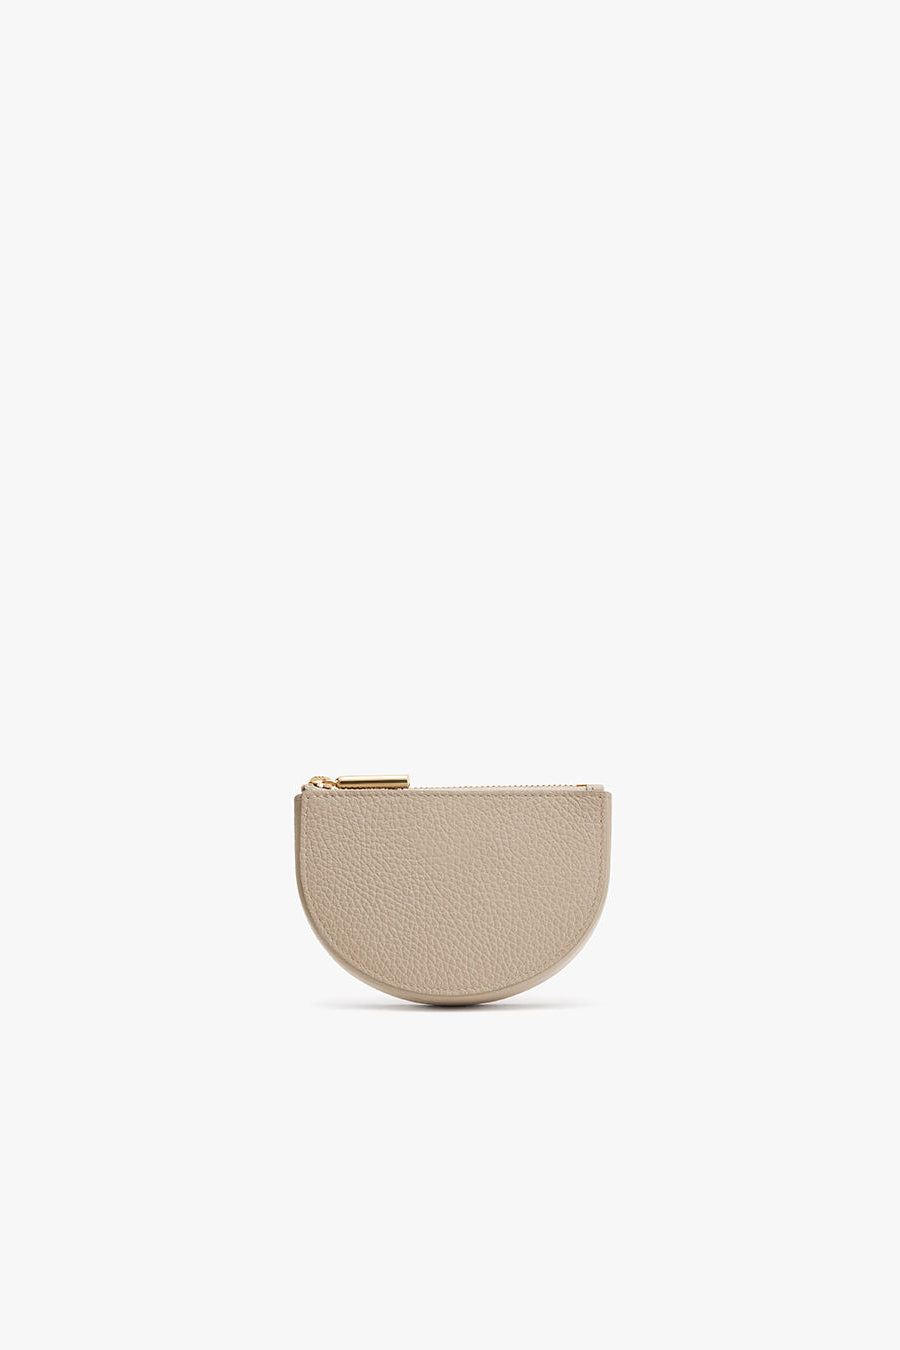 Cuyana, Bags, New Cuyana Double Moon Saddle Bag In Cappuccino Pebbled  Leather